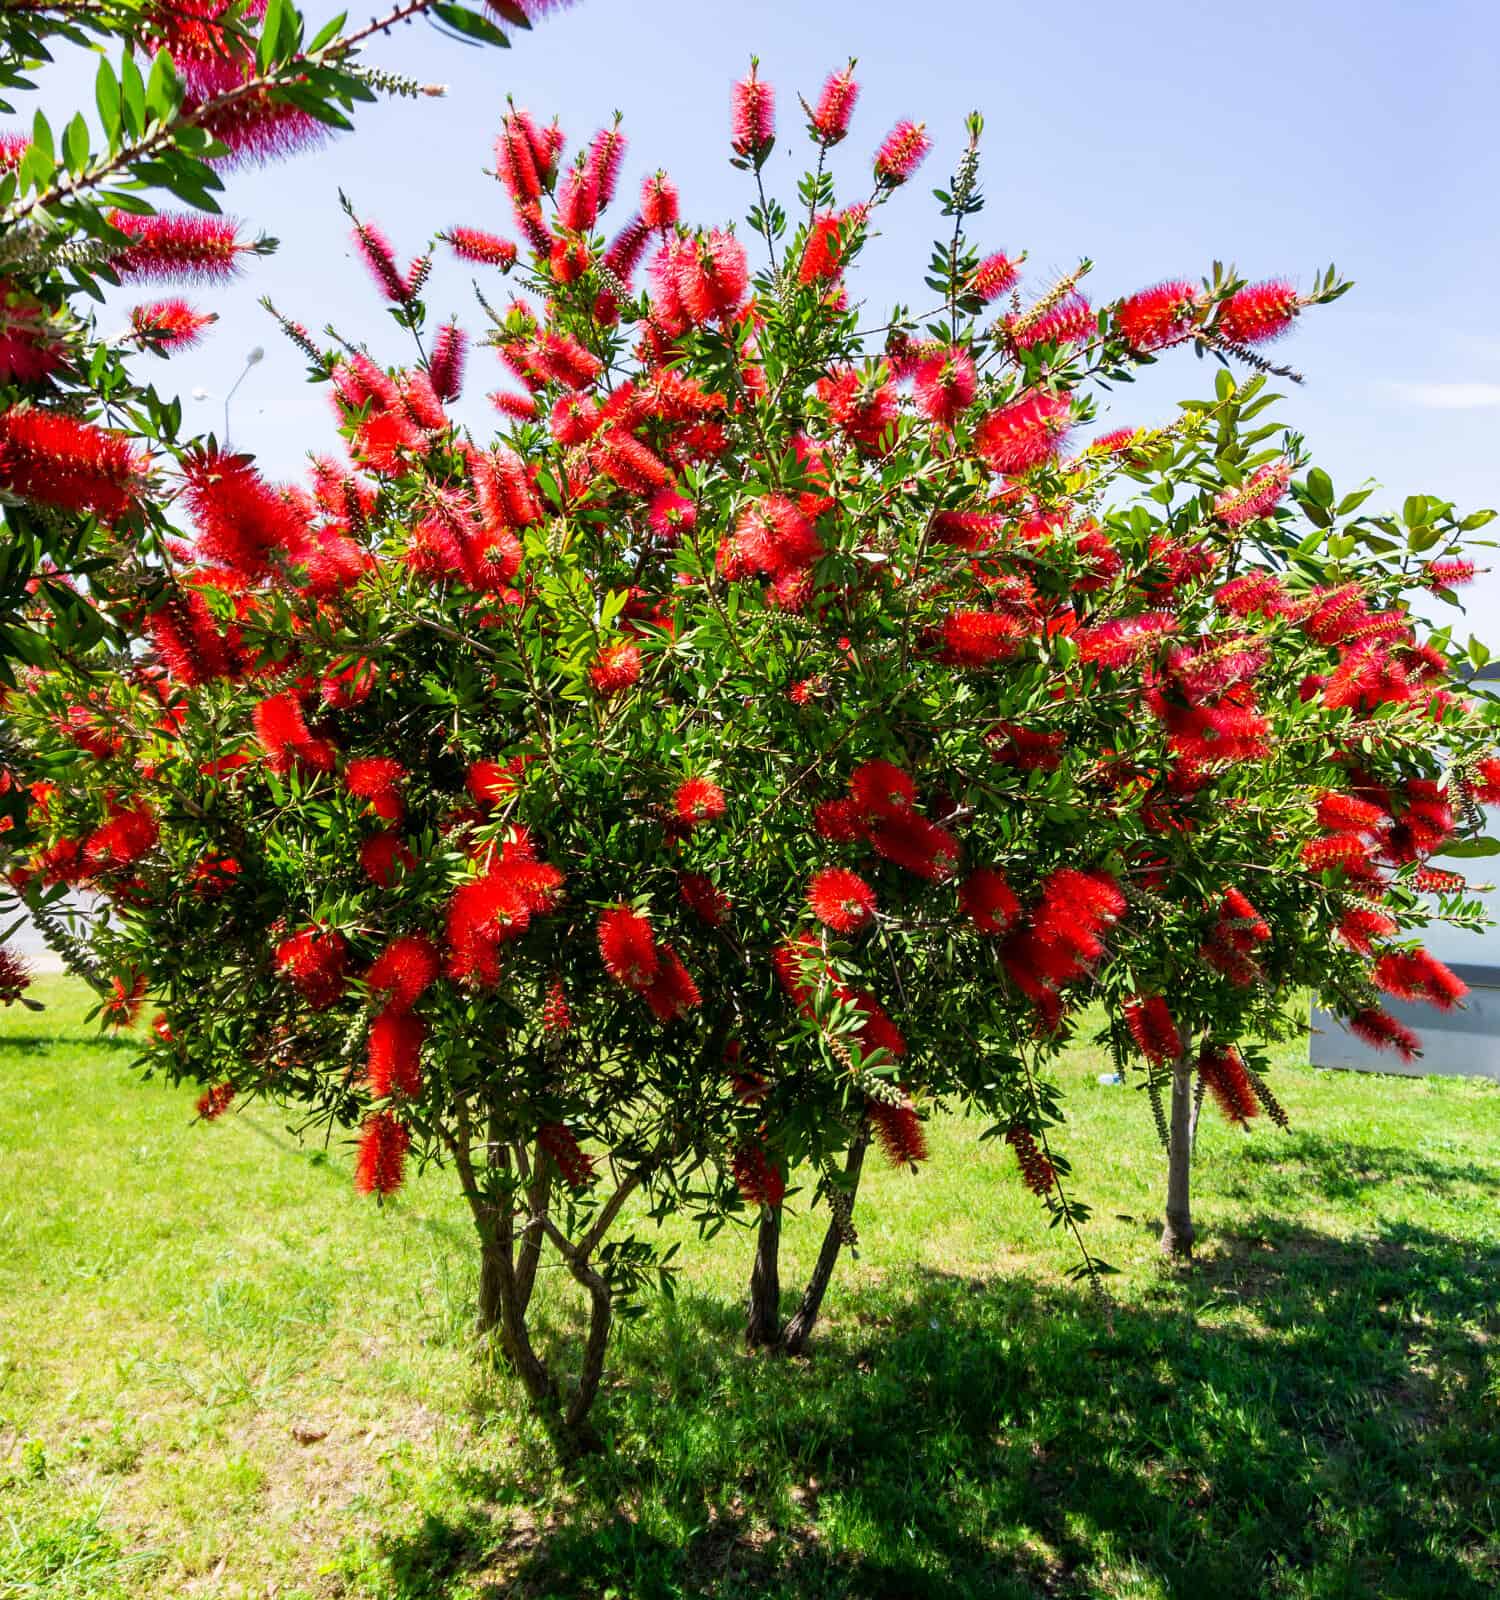 Callistemon is a genus of shrubs in the myrtle family